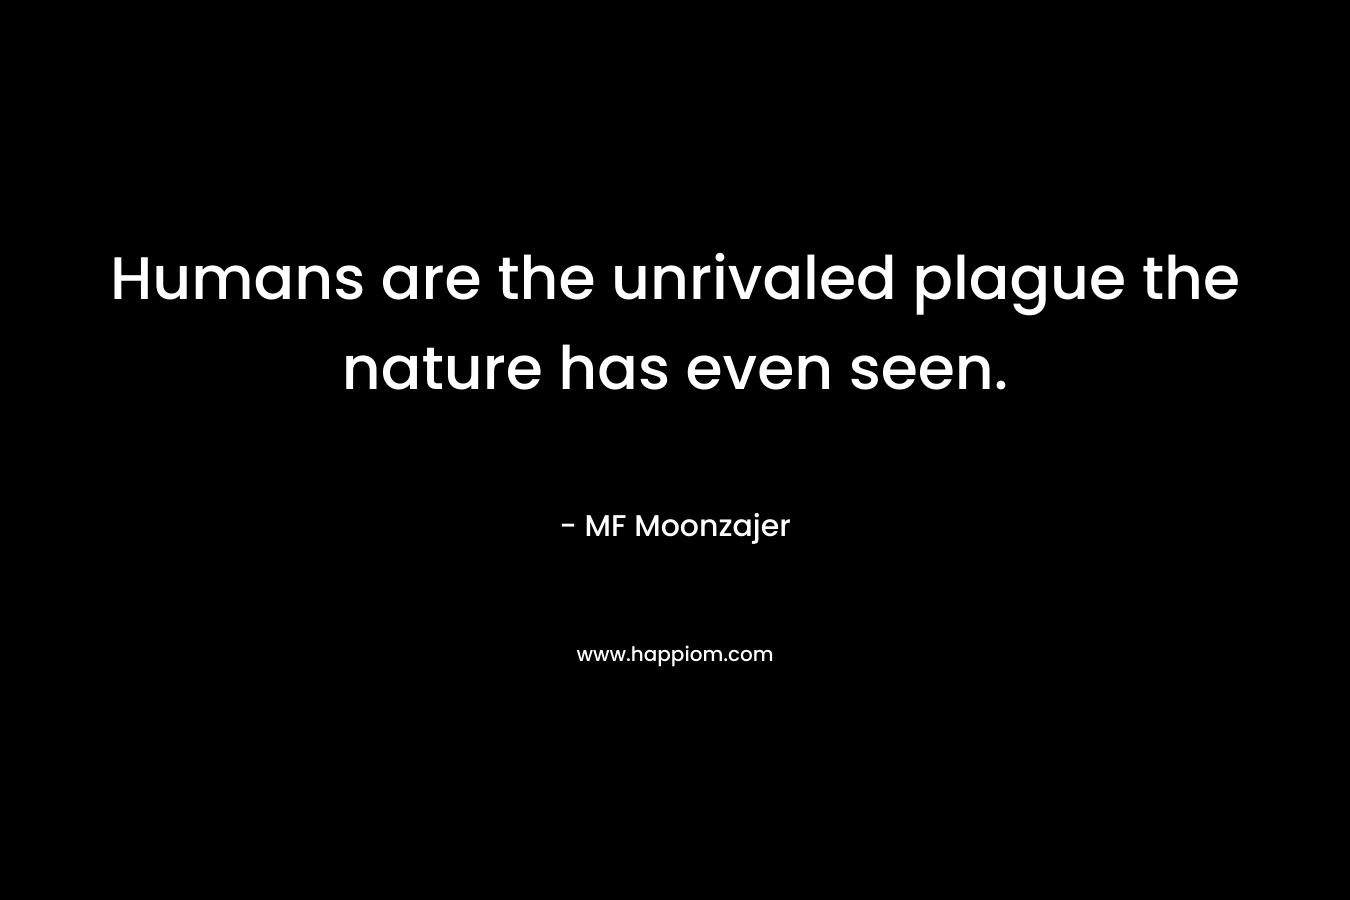 Humans are the unrivaled plague the nature has even seen.